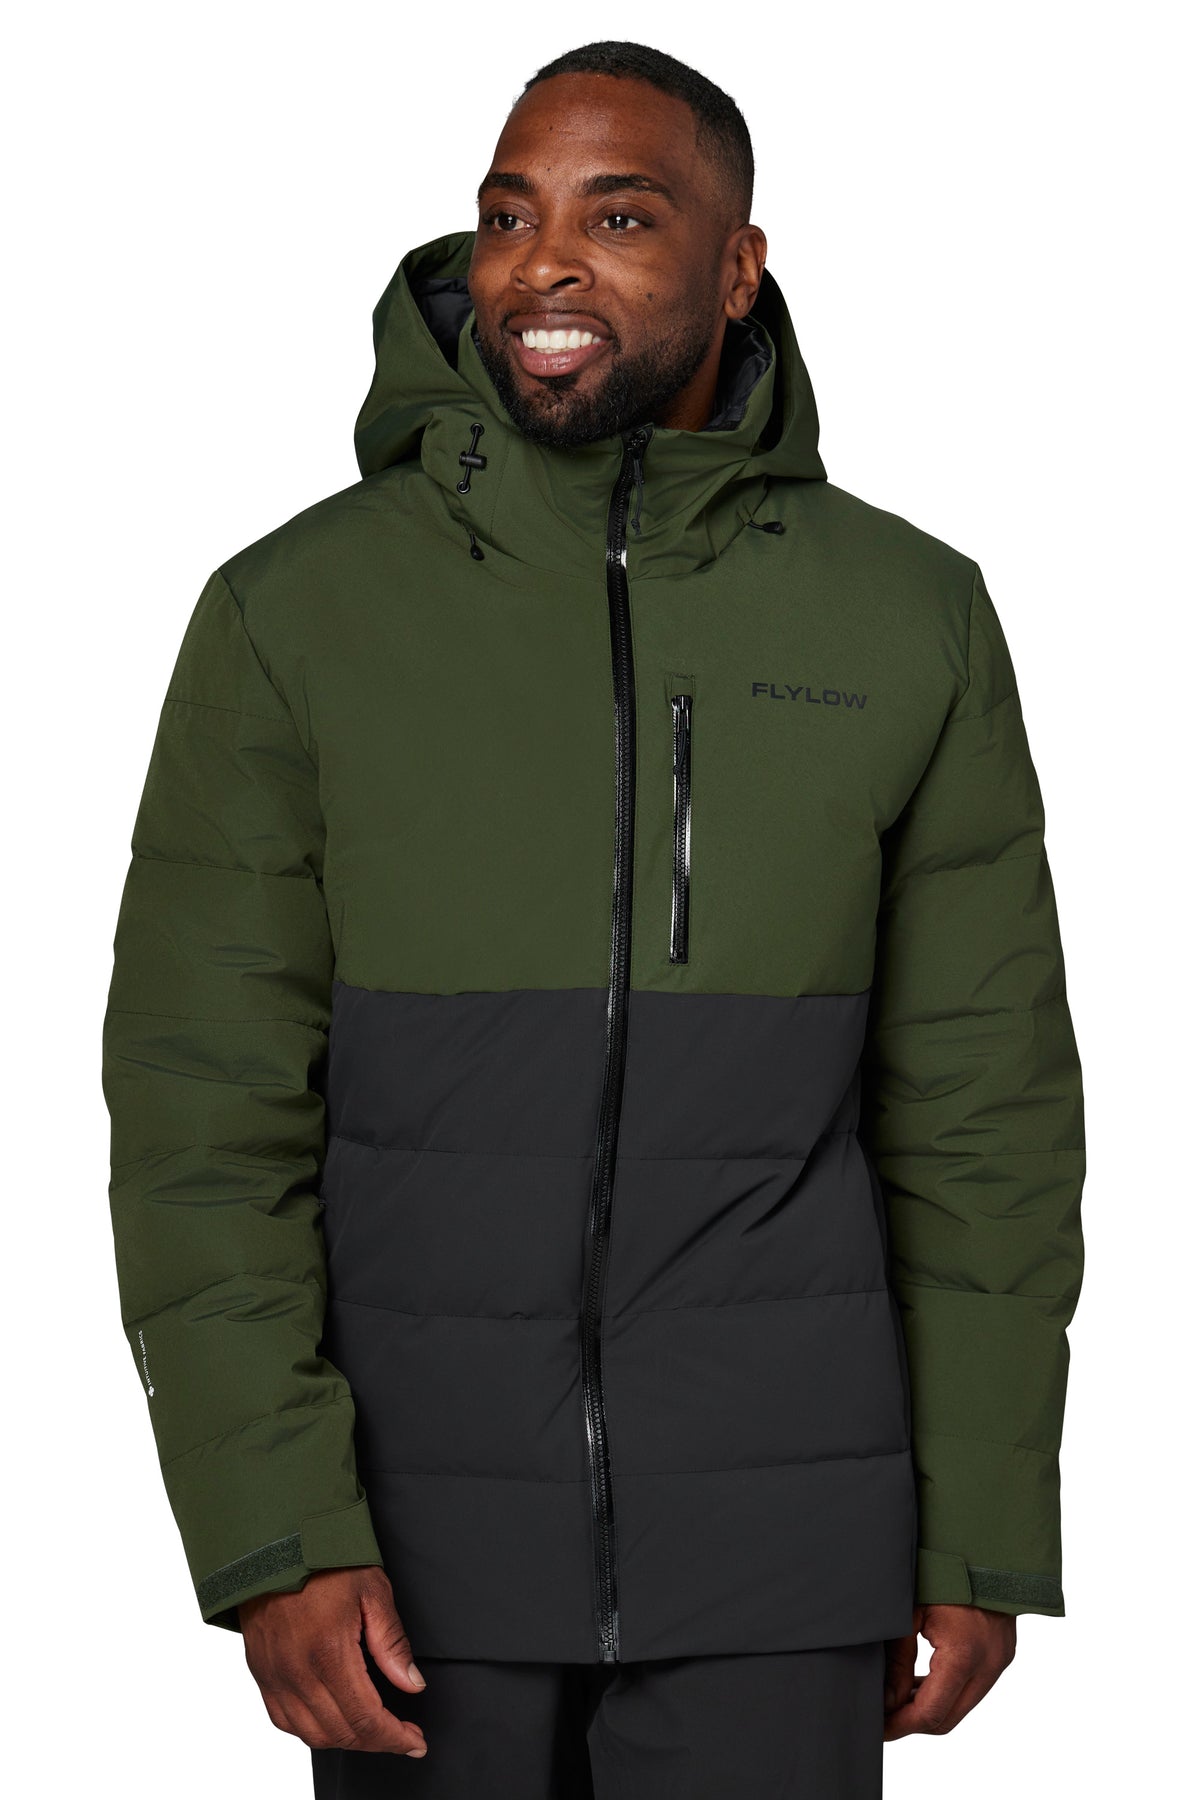 Flylow Colt Down Jacket - Men's - Timber and Night - M